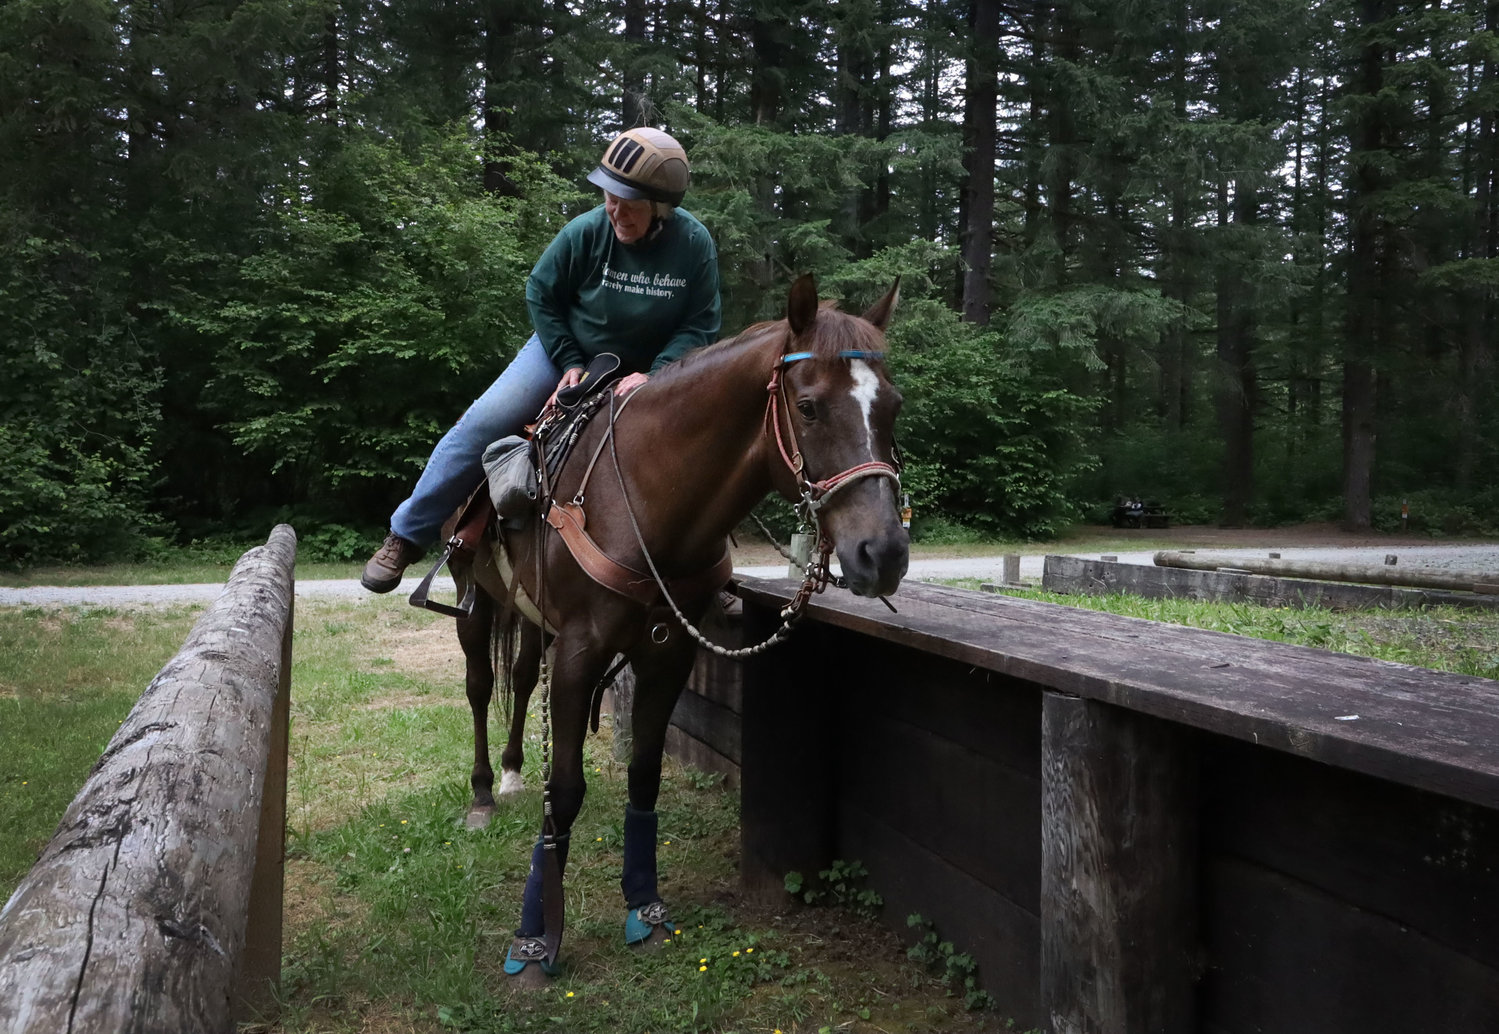 Barbara Thomas from Hockinson gets on her horse, Anthony, using the mount assistance area at Rock Creek Horse Camp in Yacolt June 25. The camp also includes ADA accessible camping spots.